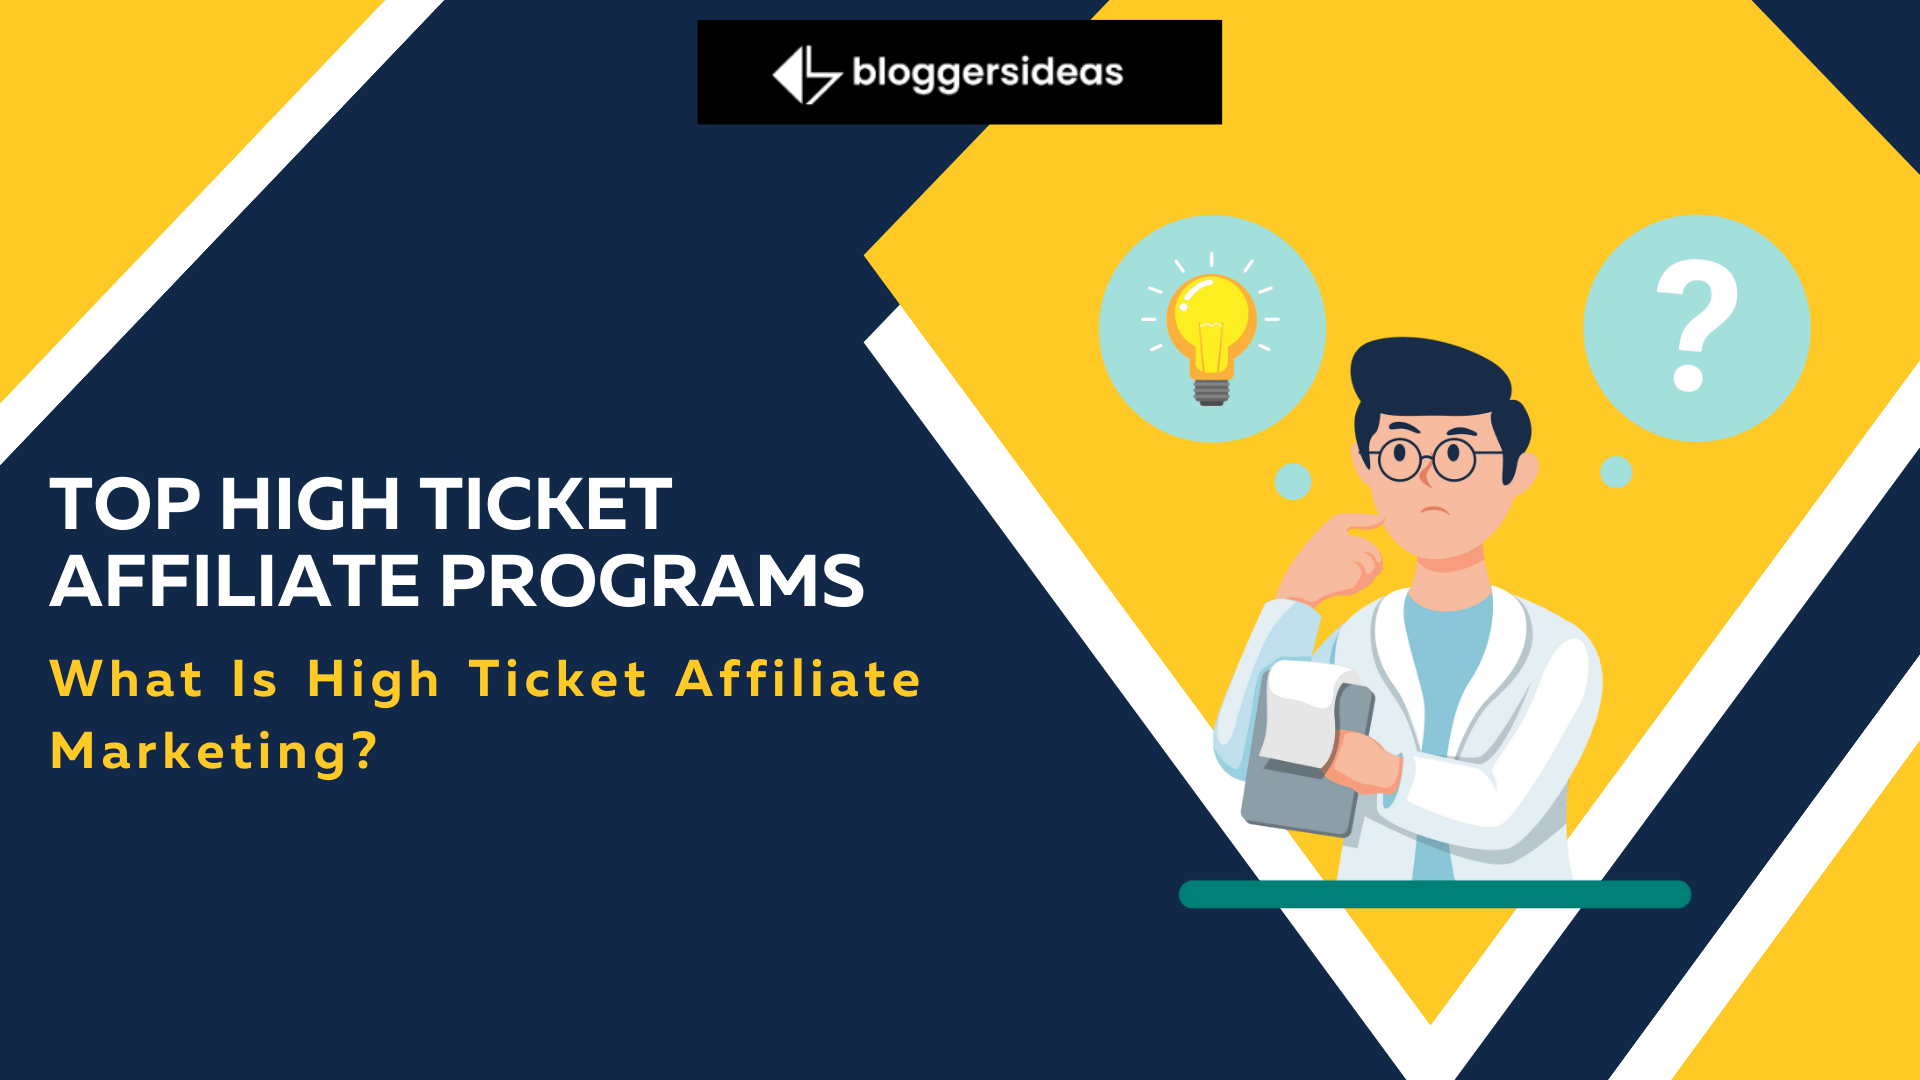 Top High Ticket Affiliate Programs